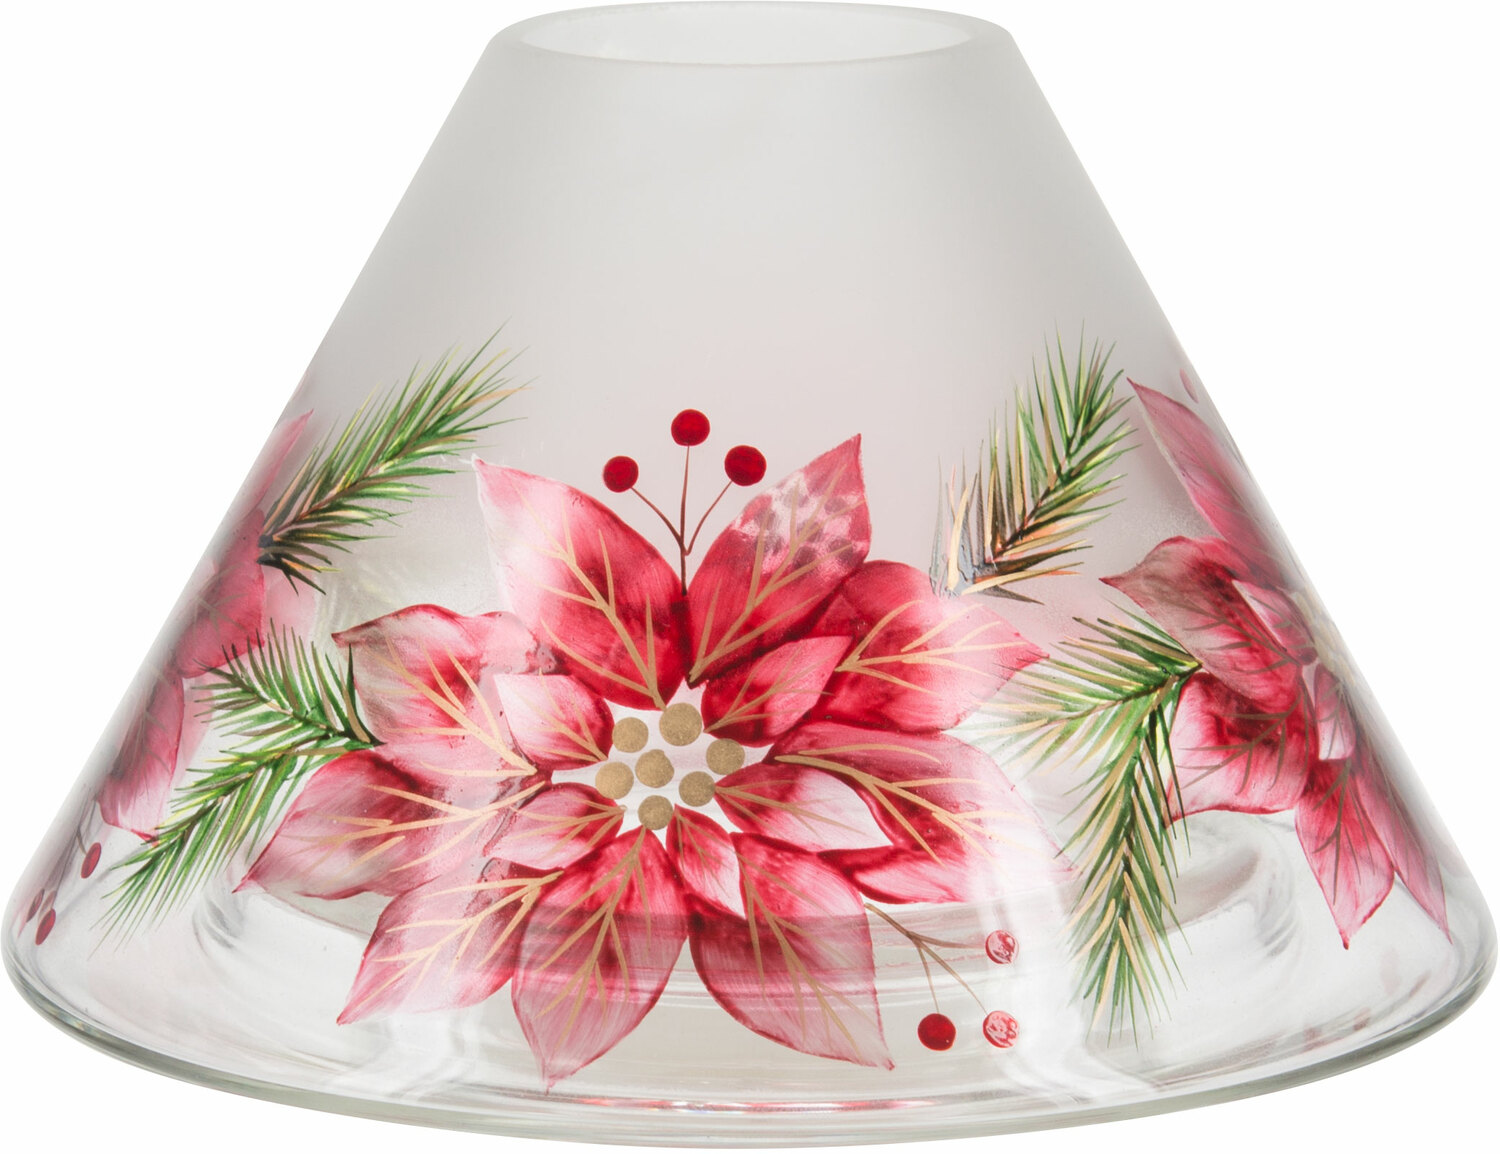 Poinsettia by Candle Decor - Poinsettia - Large Candle Shade